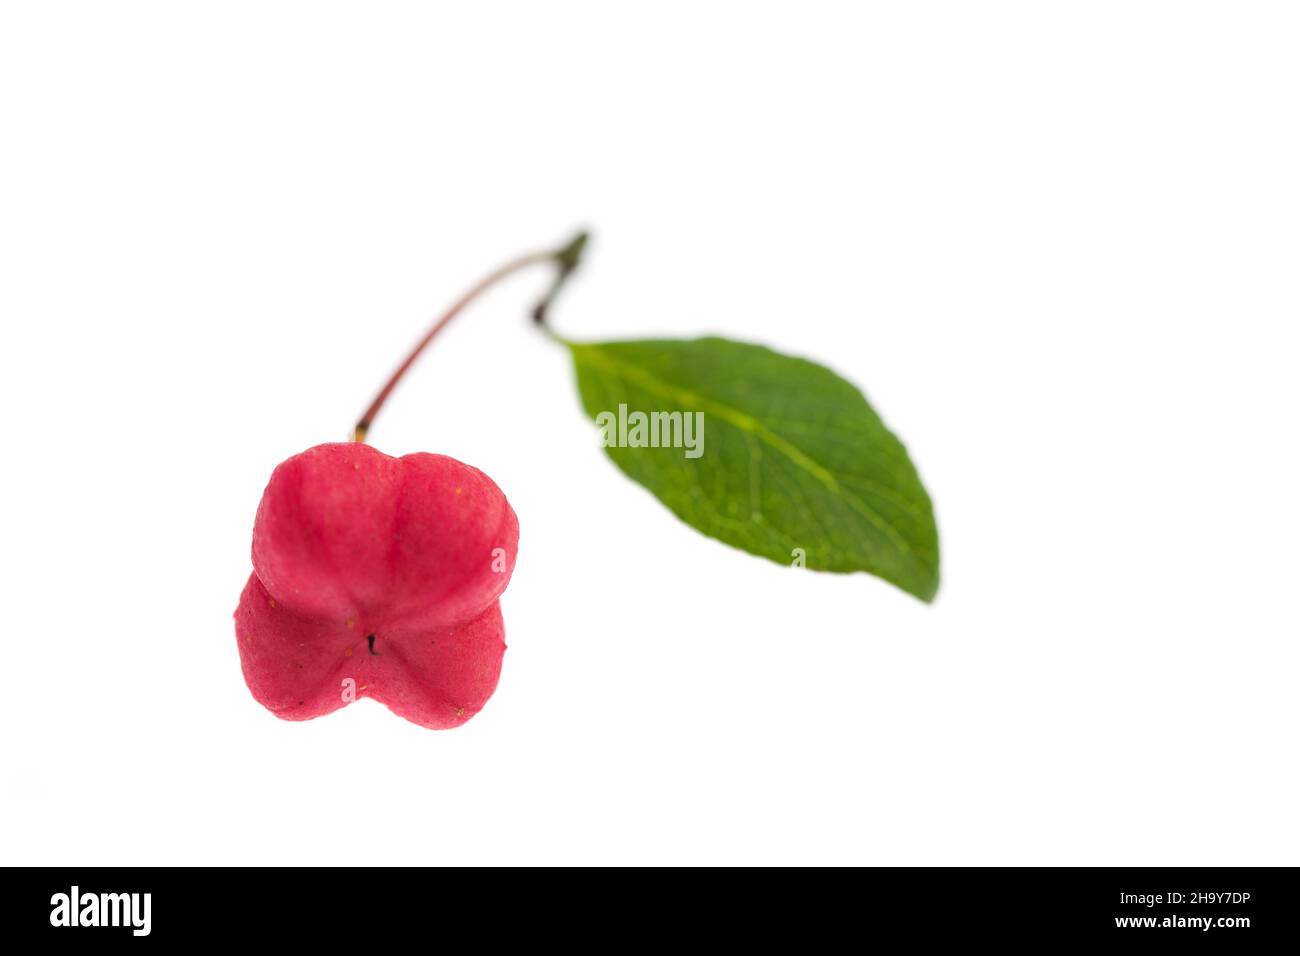 Spindle tree, berries, flower, red, seed, core, poisonous, white, leaves, background, poison, seeds, Euonymus europaeus, orange, healthy, green, berry Stock Photo